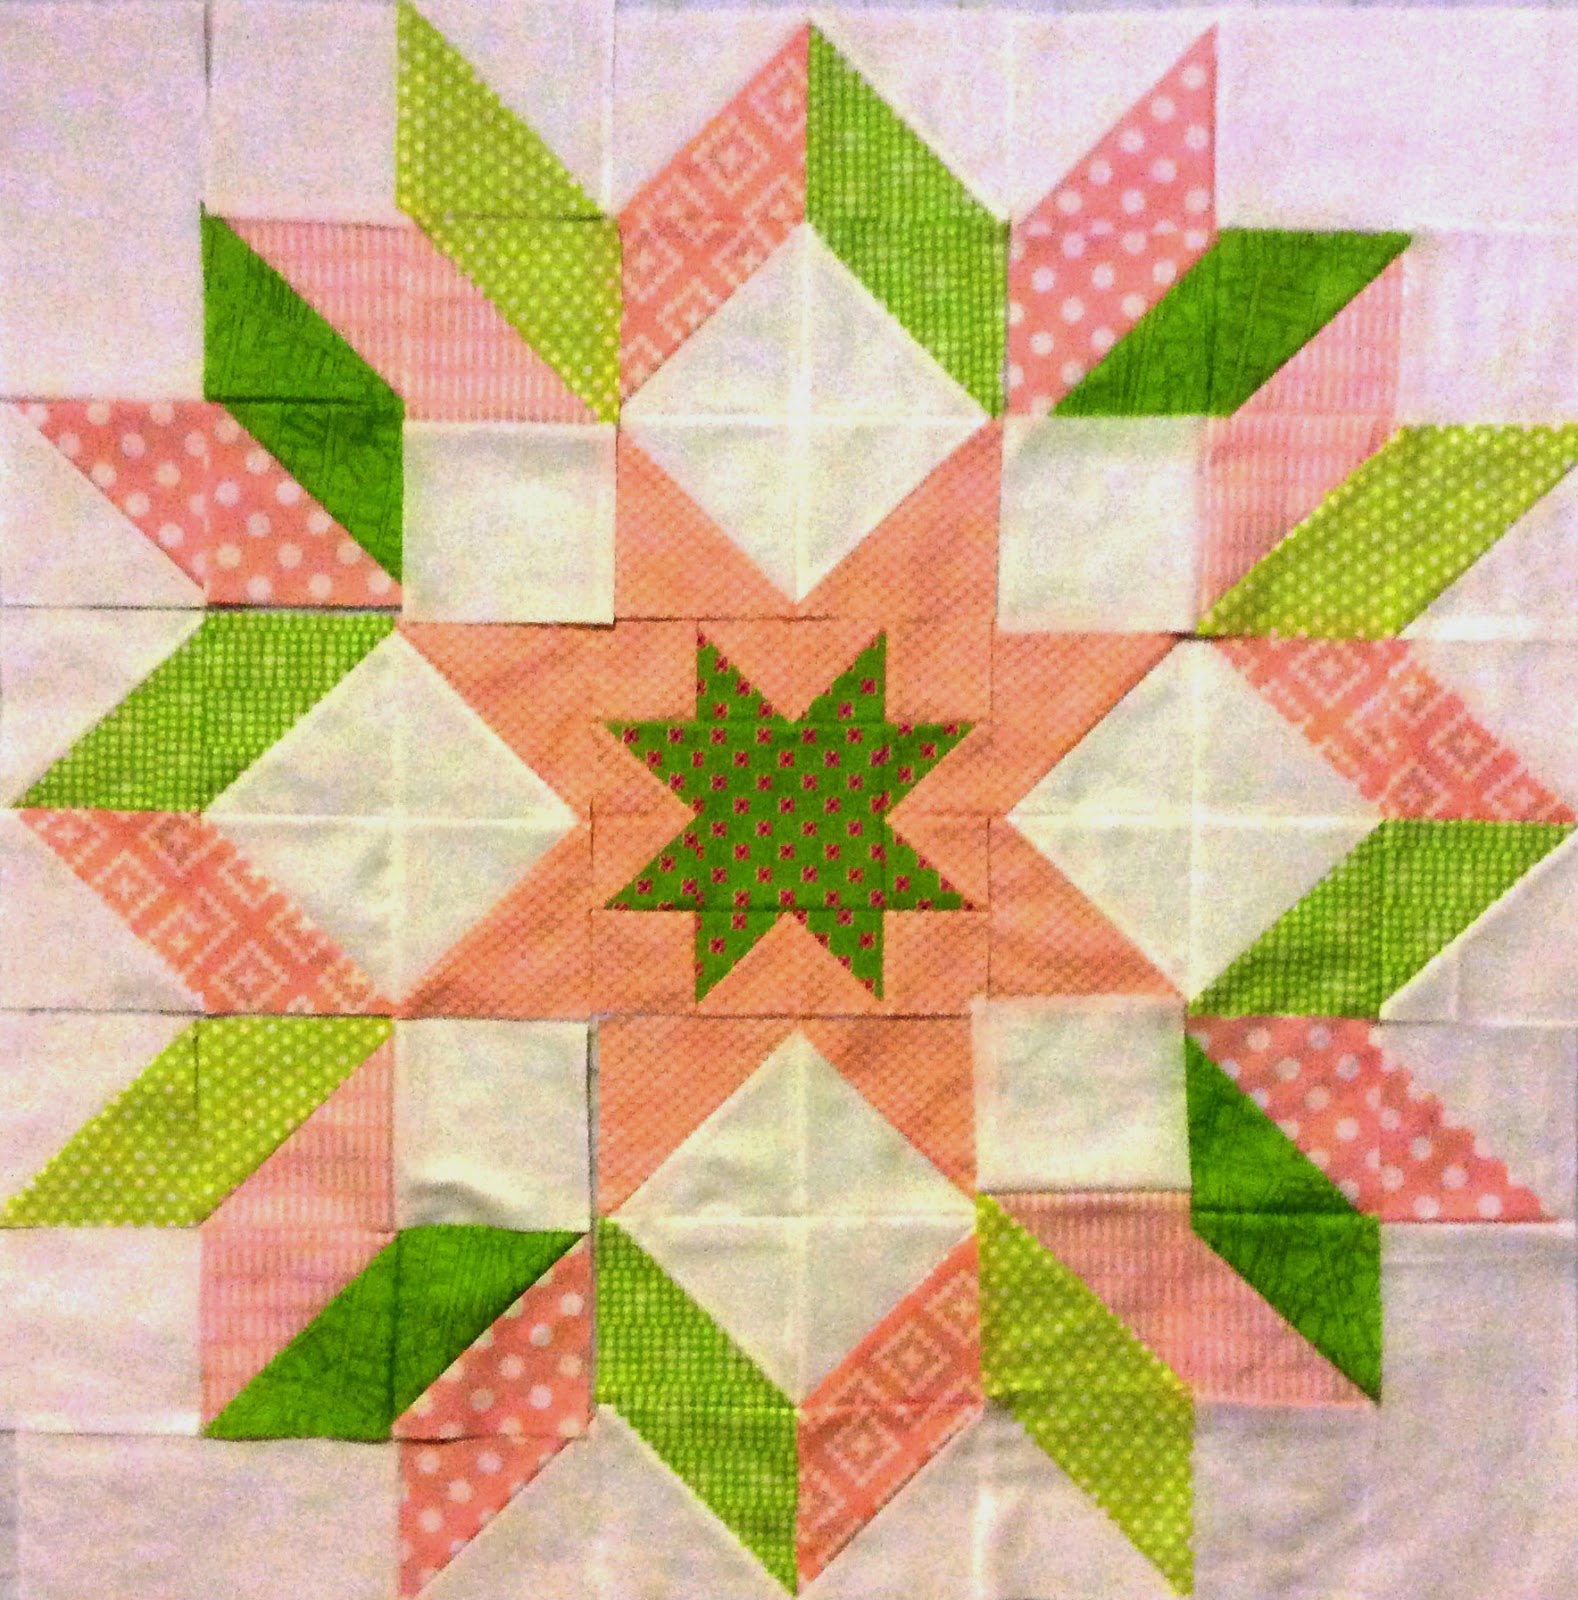 The Starburst Quilt pink and green